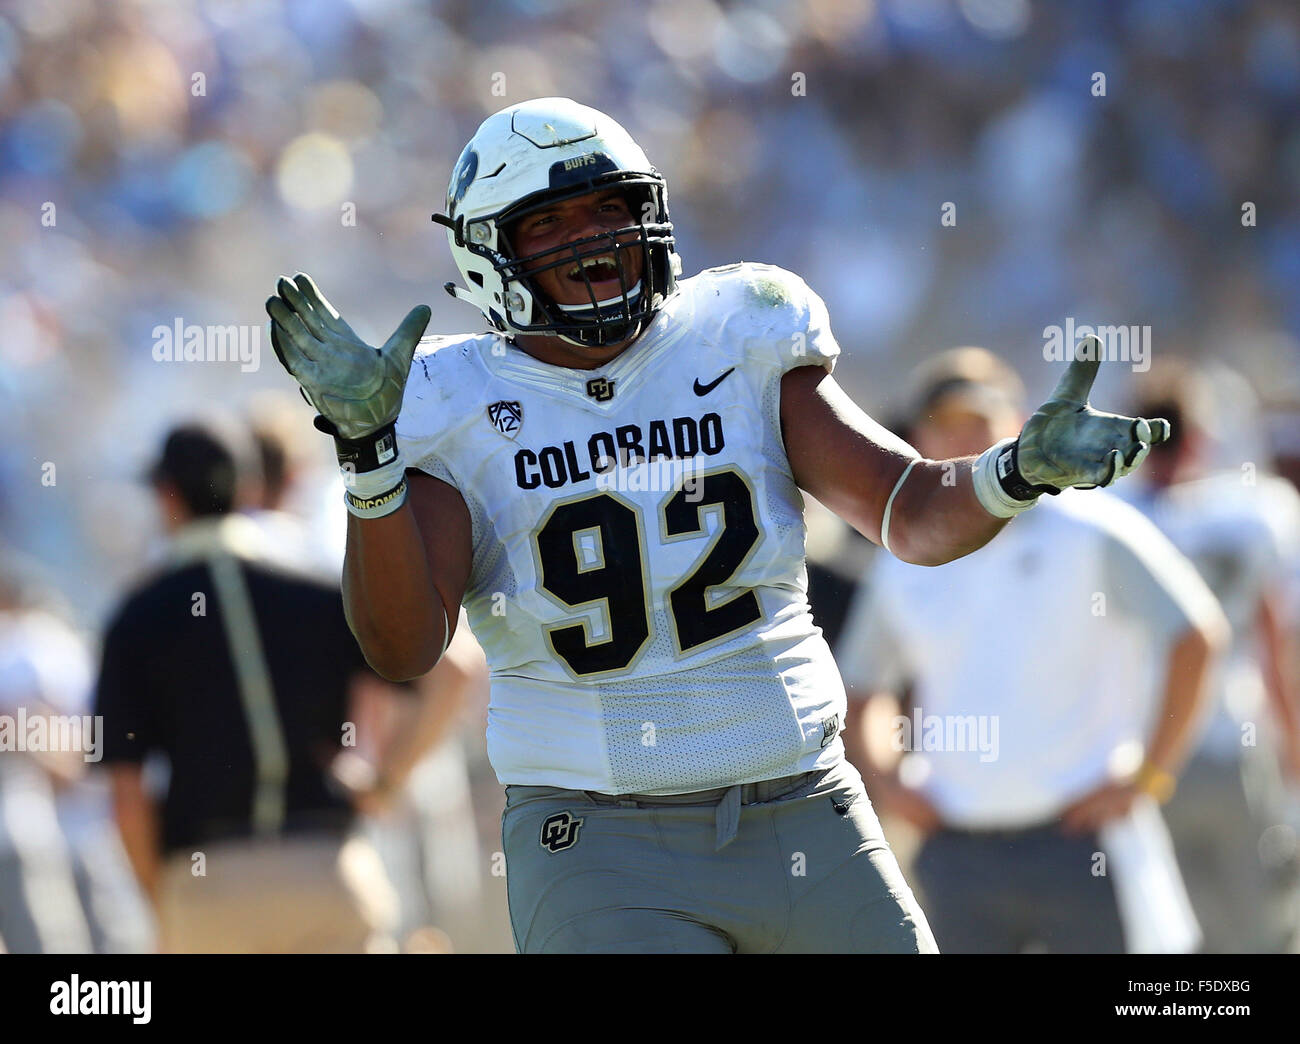 October 31, Colorado Buffaloes defensive lineman Jordan Carrell #92 in action during the college football game between UCLA Bruins and the Colorado Buffaloes at the Rose Bowl in Pasadena, California.Charles